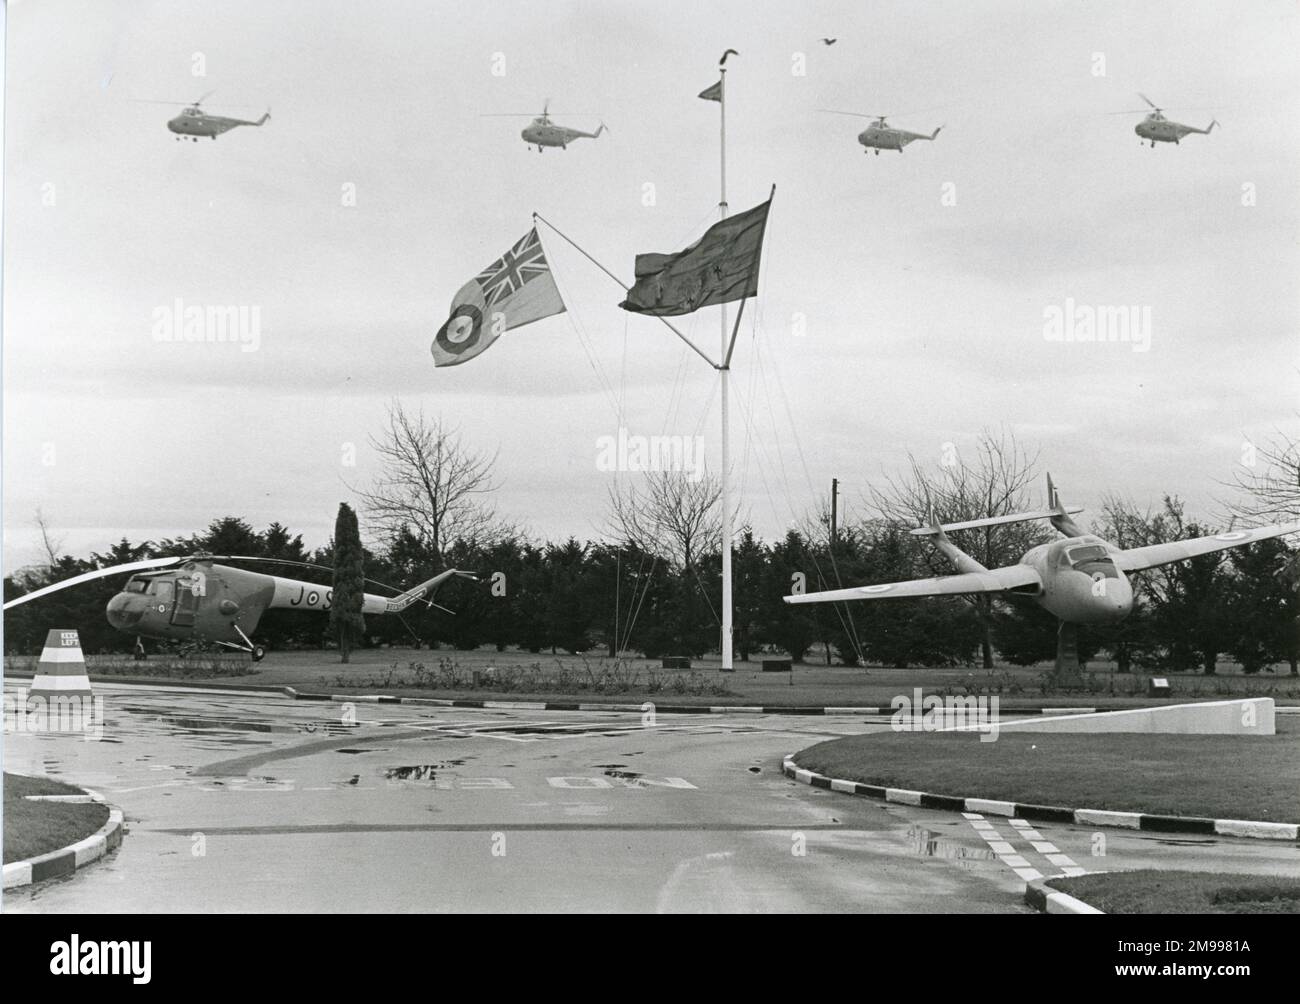 Four Westland Whirlwinds of No.2 Flying Training School, RAF Shawbury, near Shrewsbury, make a final flight over their base on 17 December 1980, to mark the withdrawal of the type from the training role after 26 years of service. The gate guardians are a Bristol Sycamore helicopter and a de Havilland Vampire T11. Stock Photo